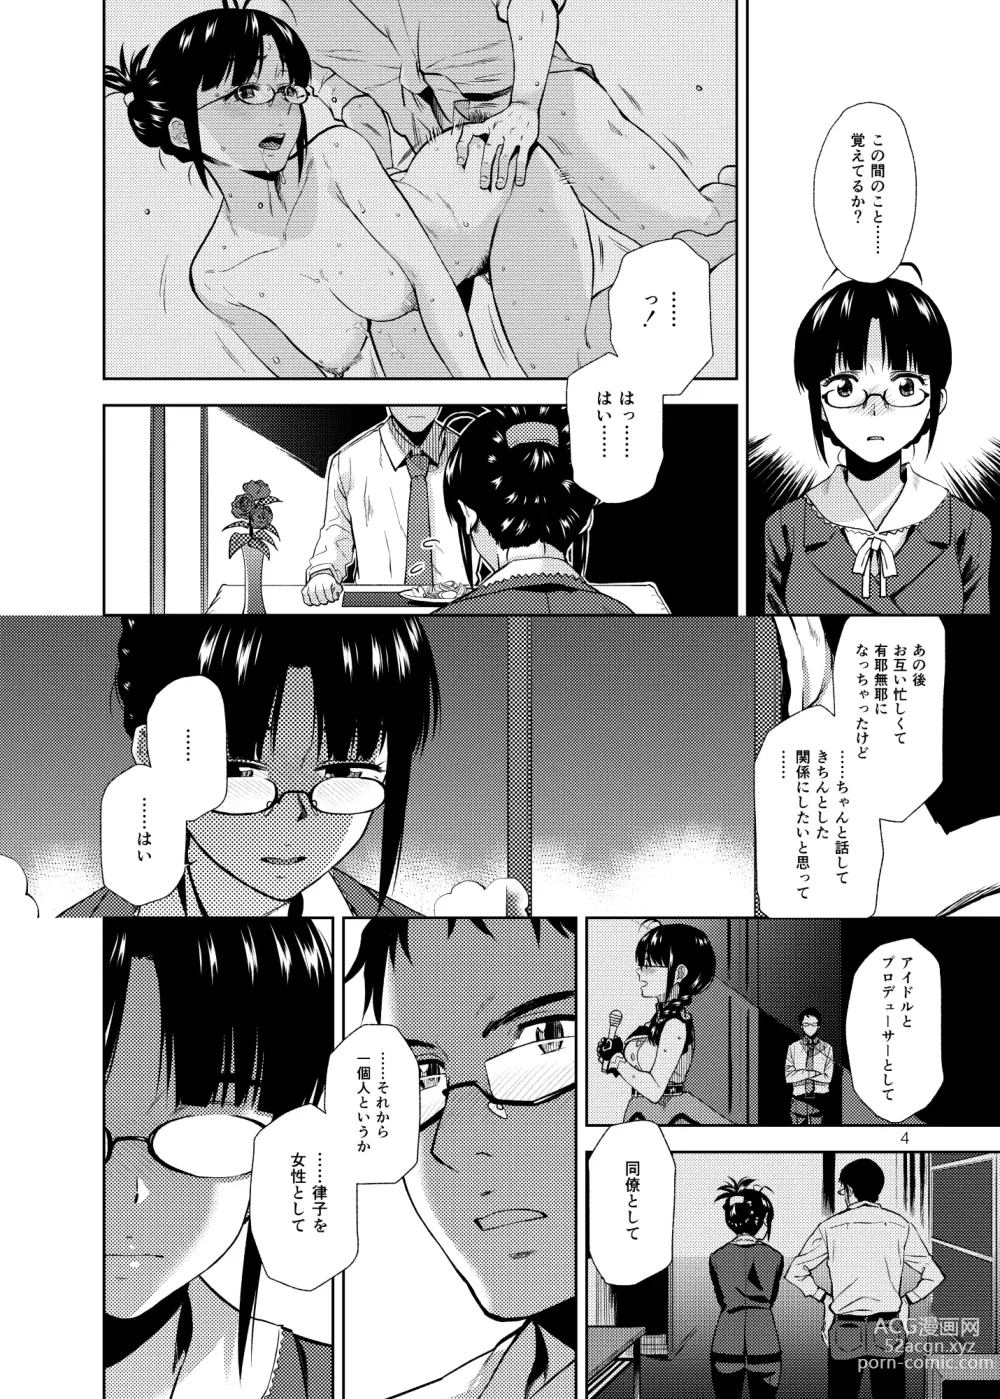 Page 5 of doujinshi NAKED HEART